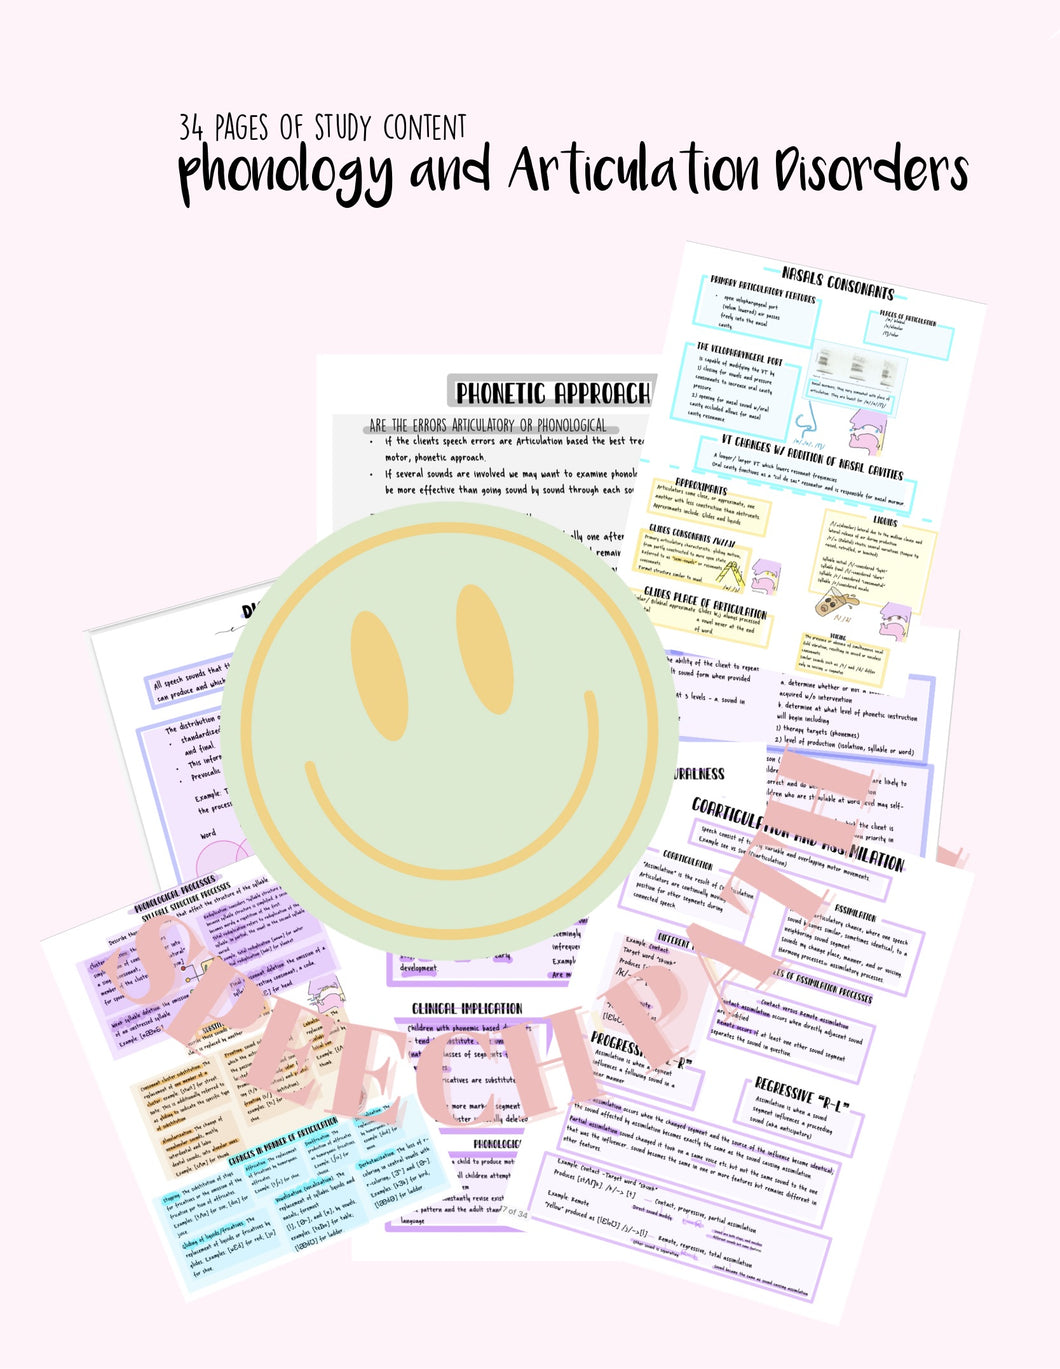 Phonology and Articulation Disorders study guide/ Digital Prints